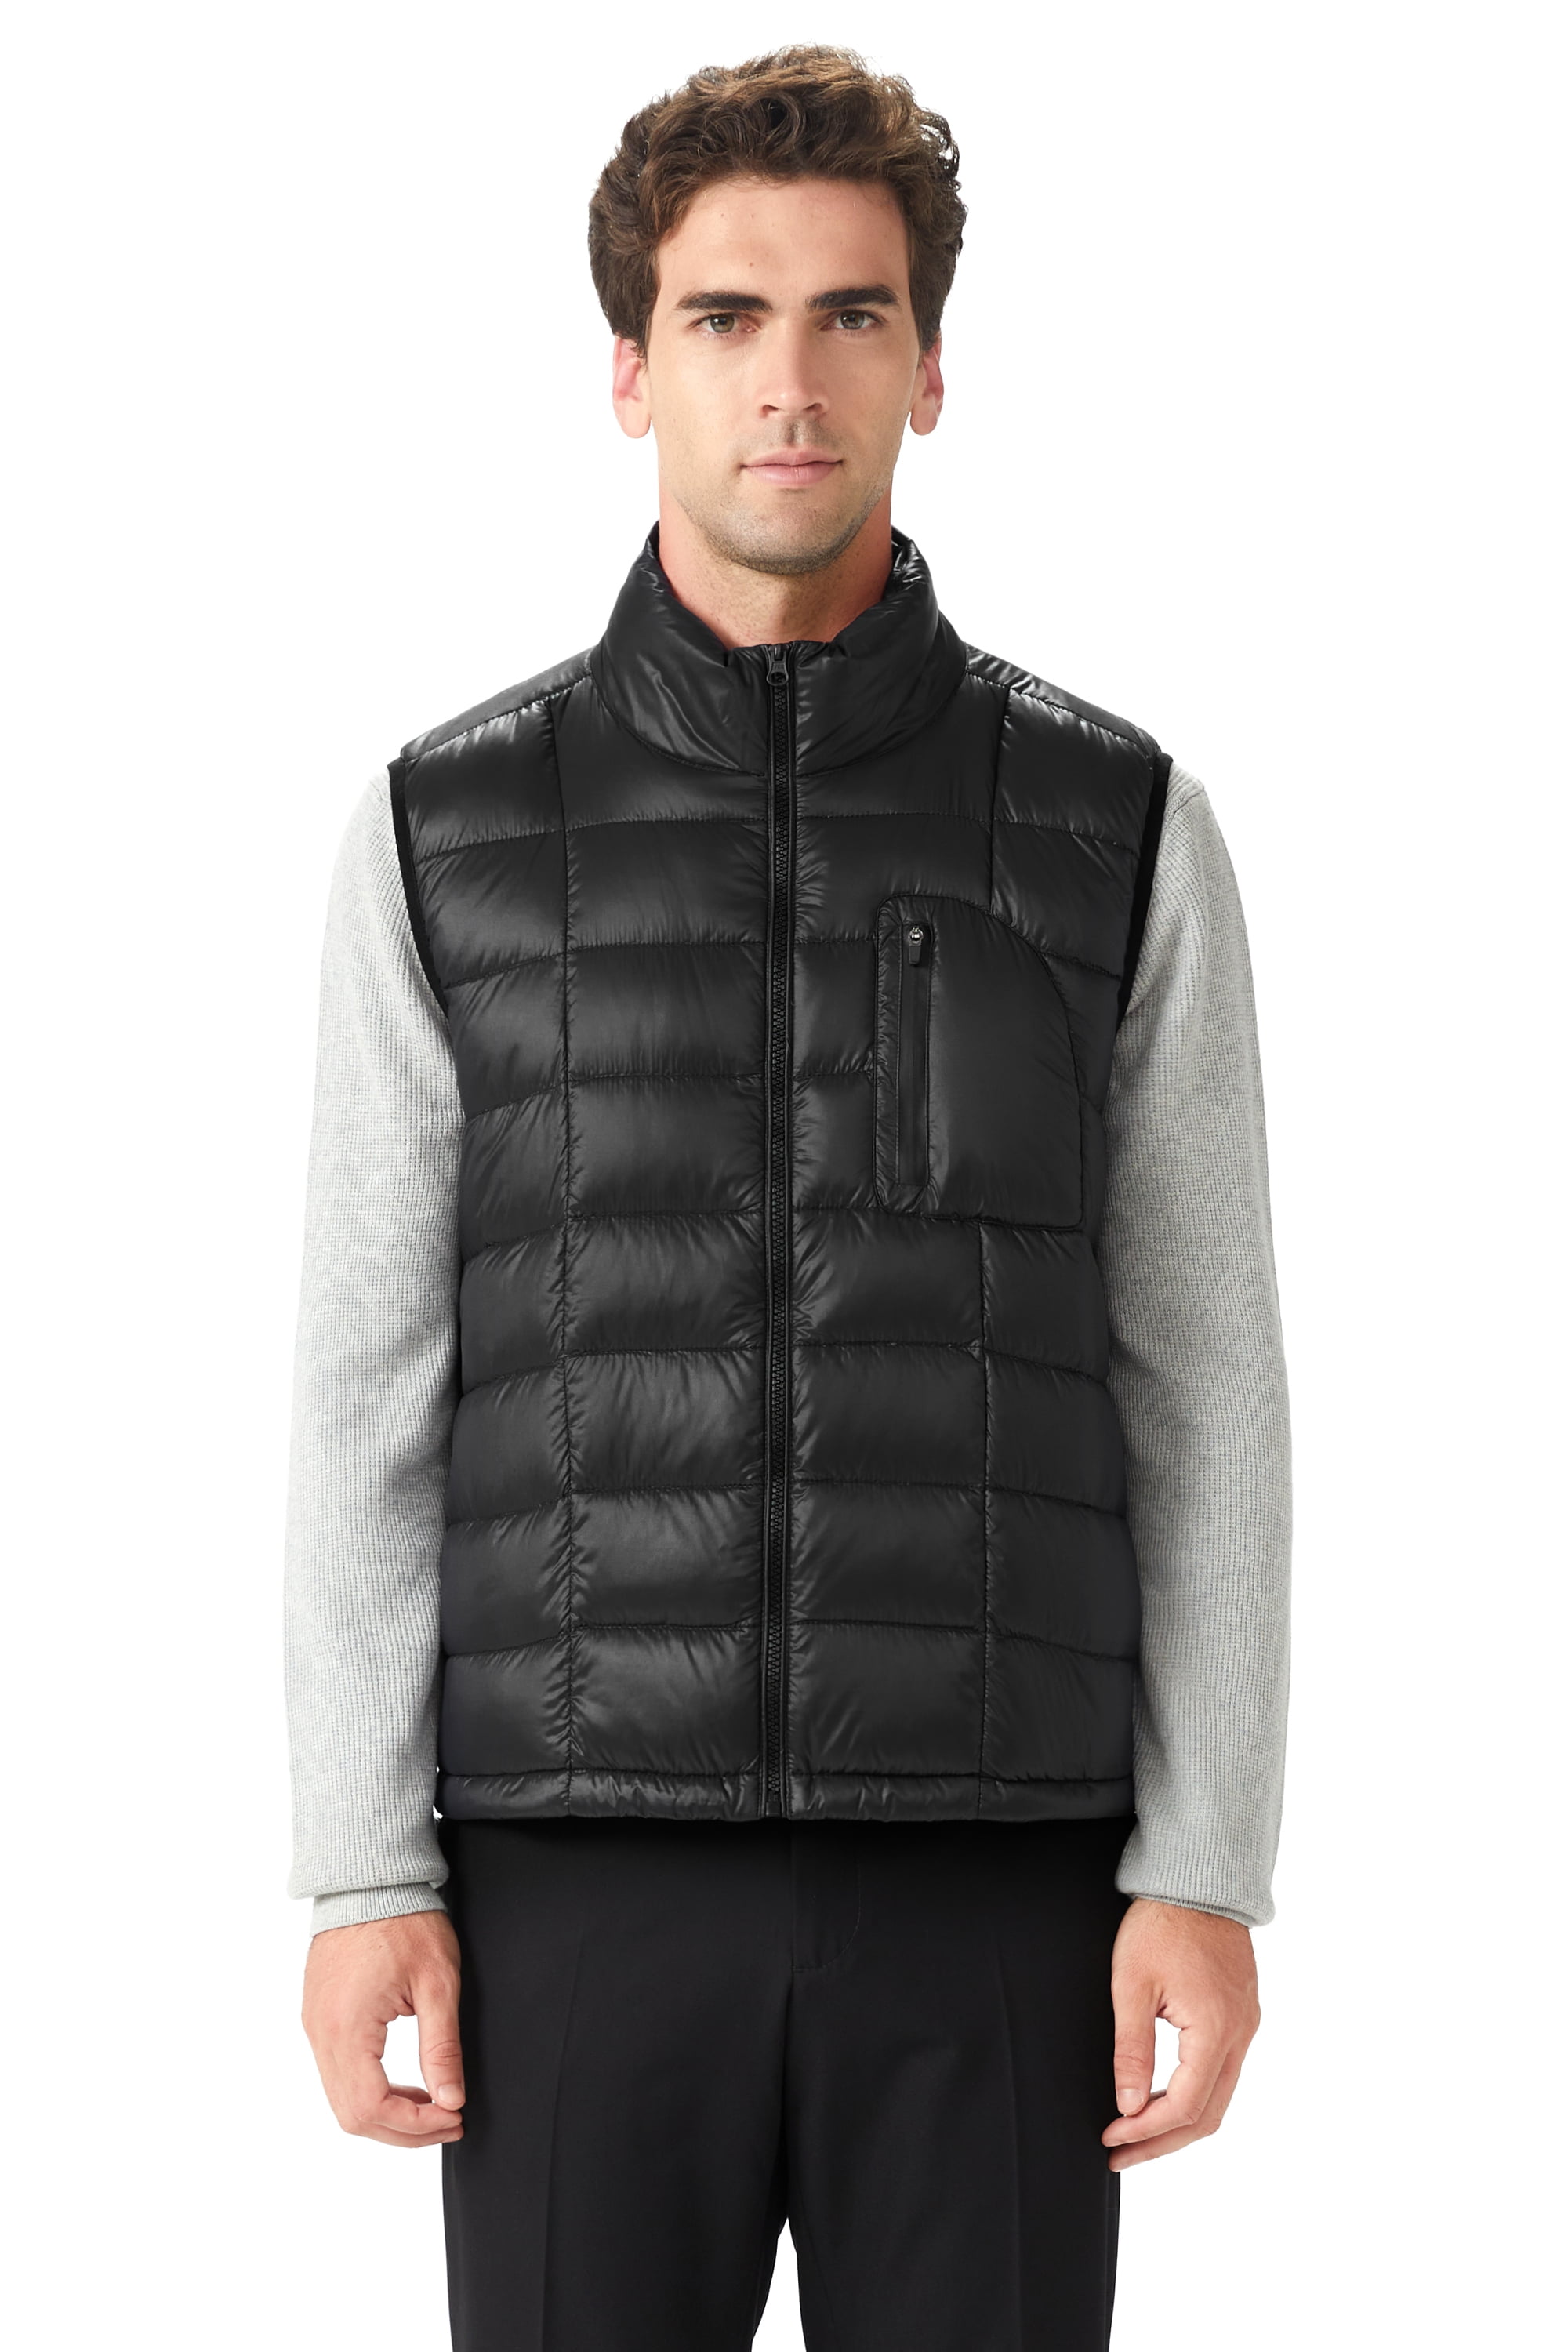 Orolay Men's Ultra Lightweight Down Vests Quilted Packable Winter Vest ...